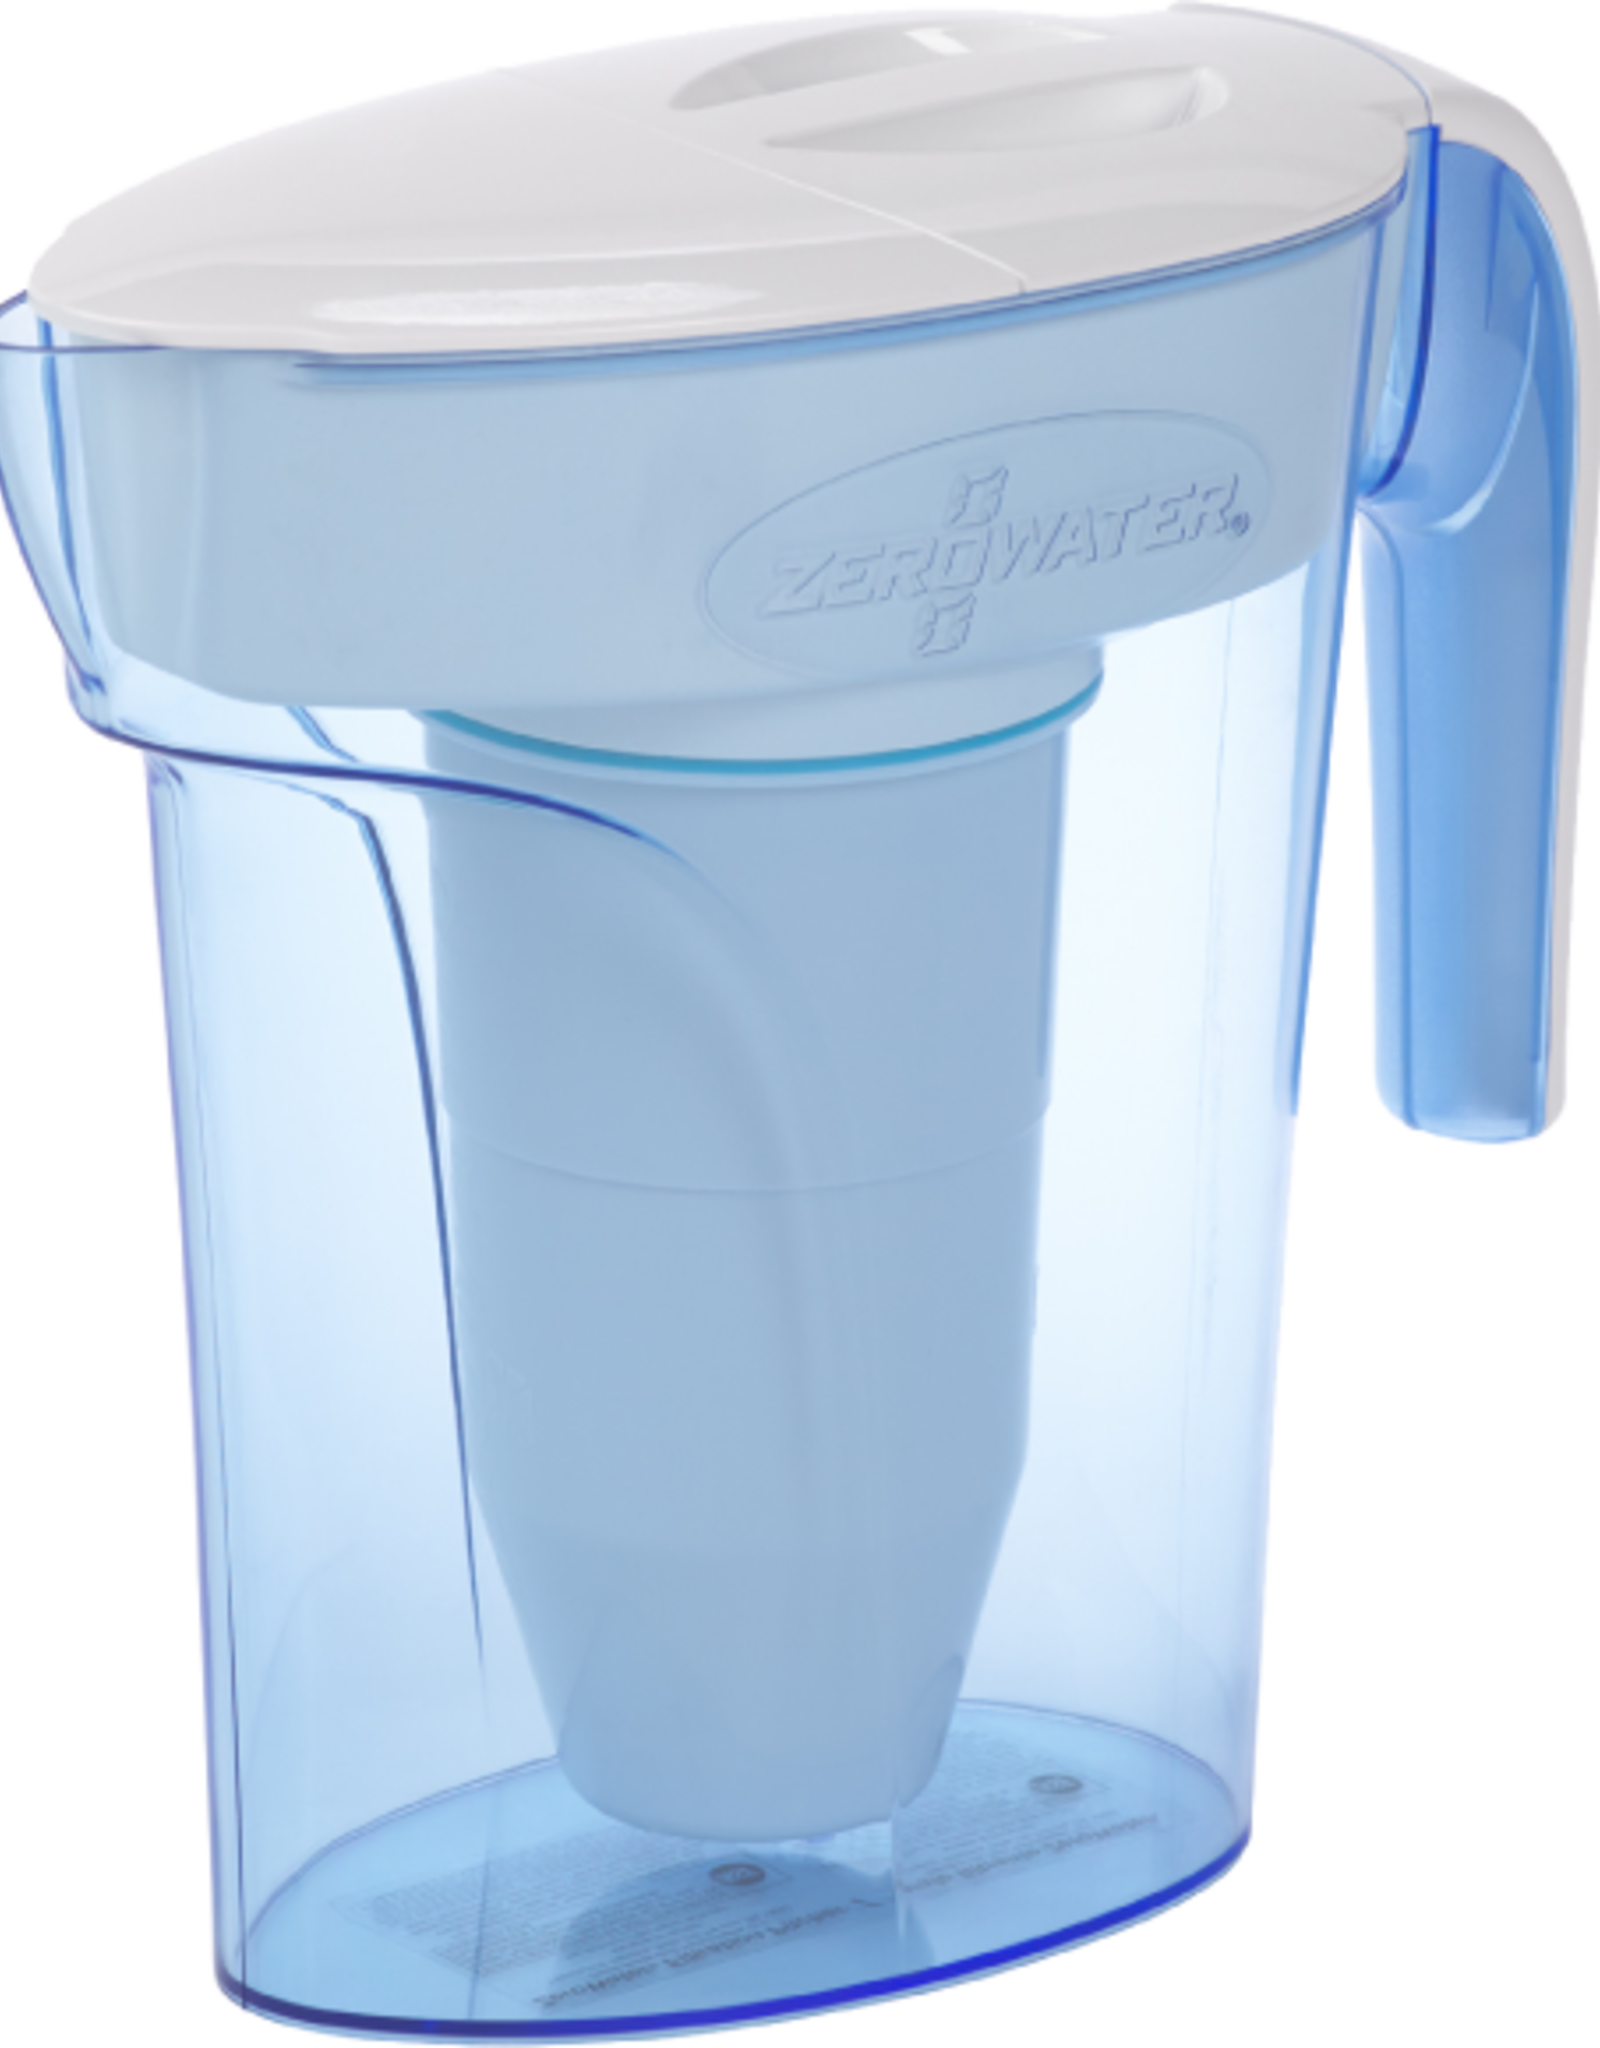 ZeroWater 7 Cup Pitcher